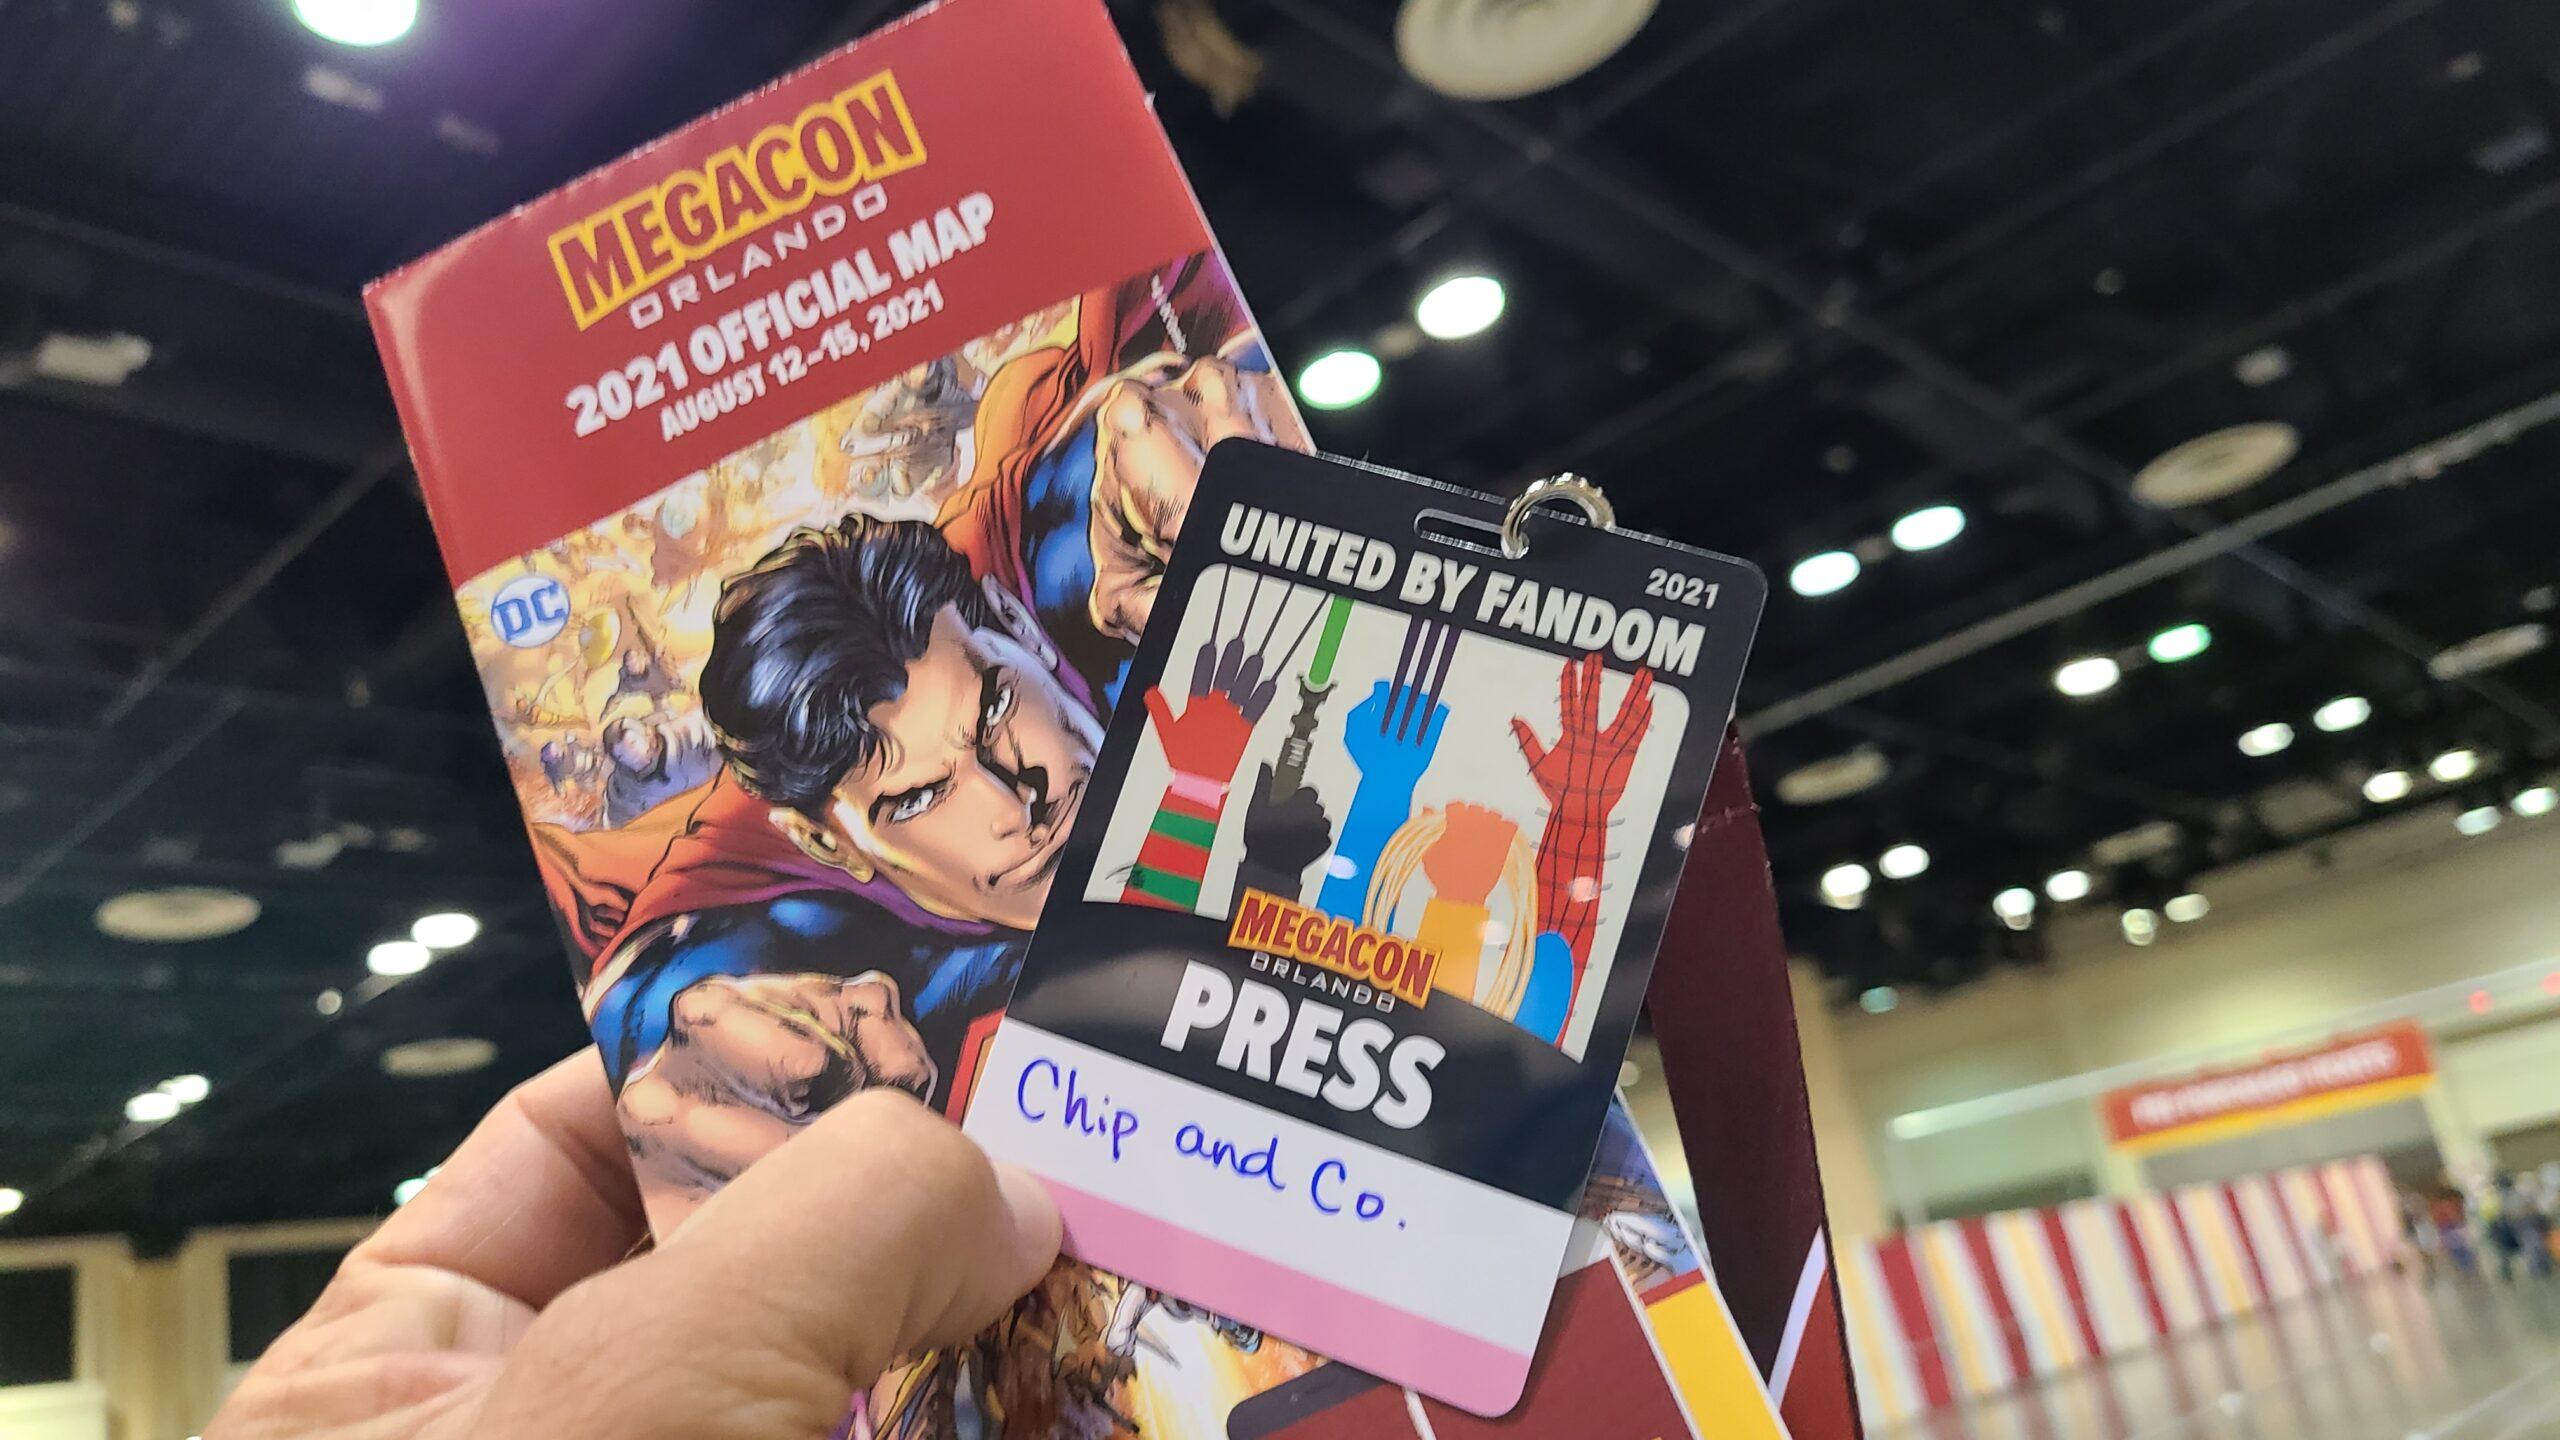 Megacon is returning to Orange County Convention Center May 19-22, 2022 with a Huge Line-up